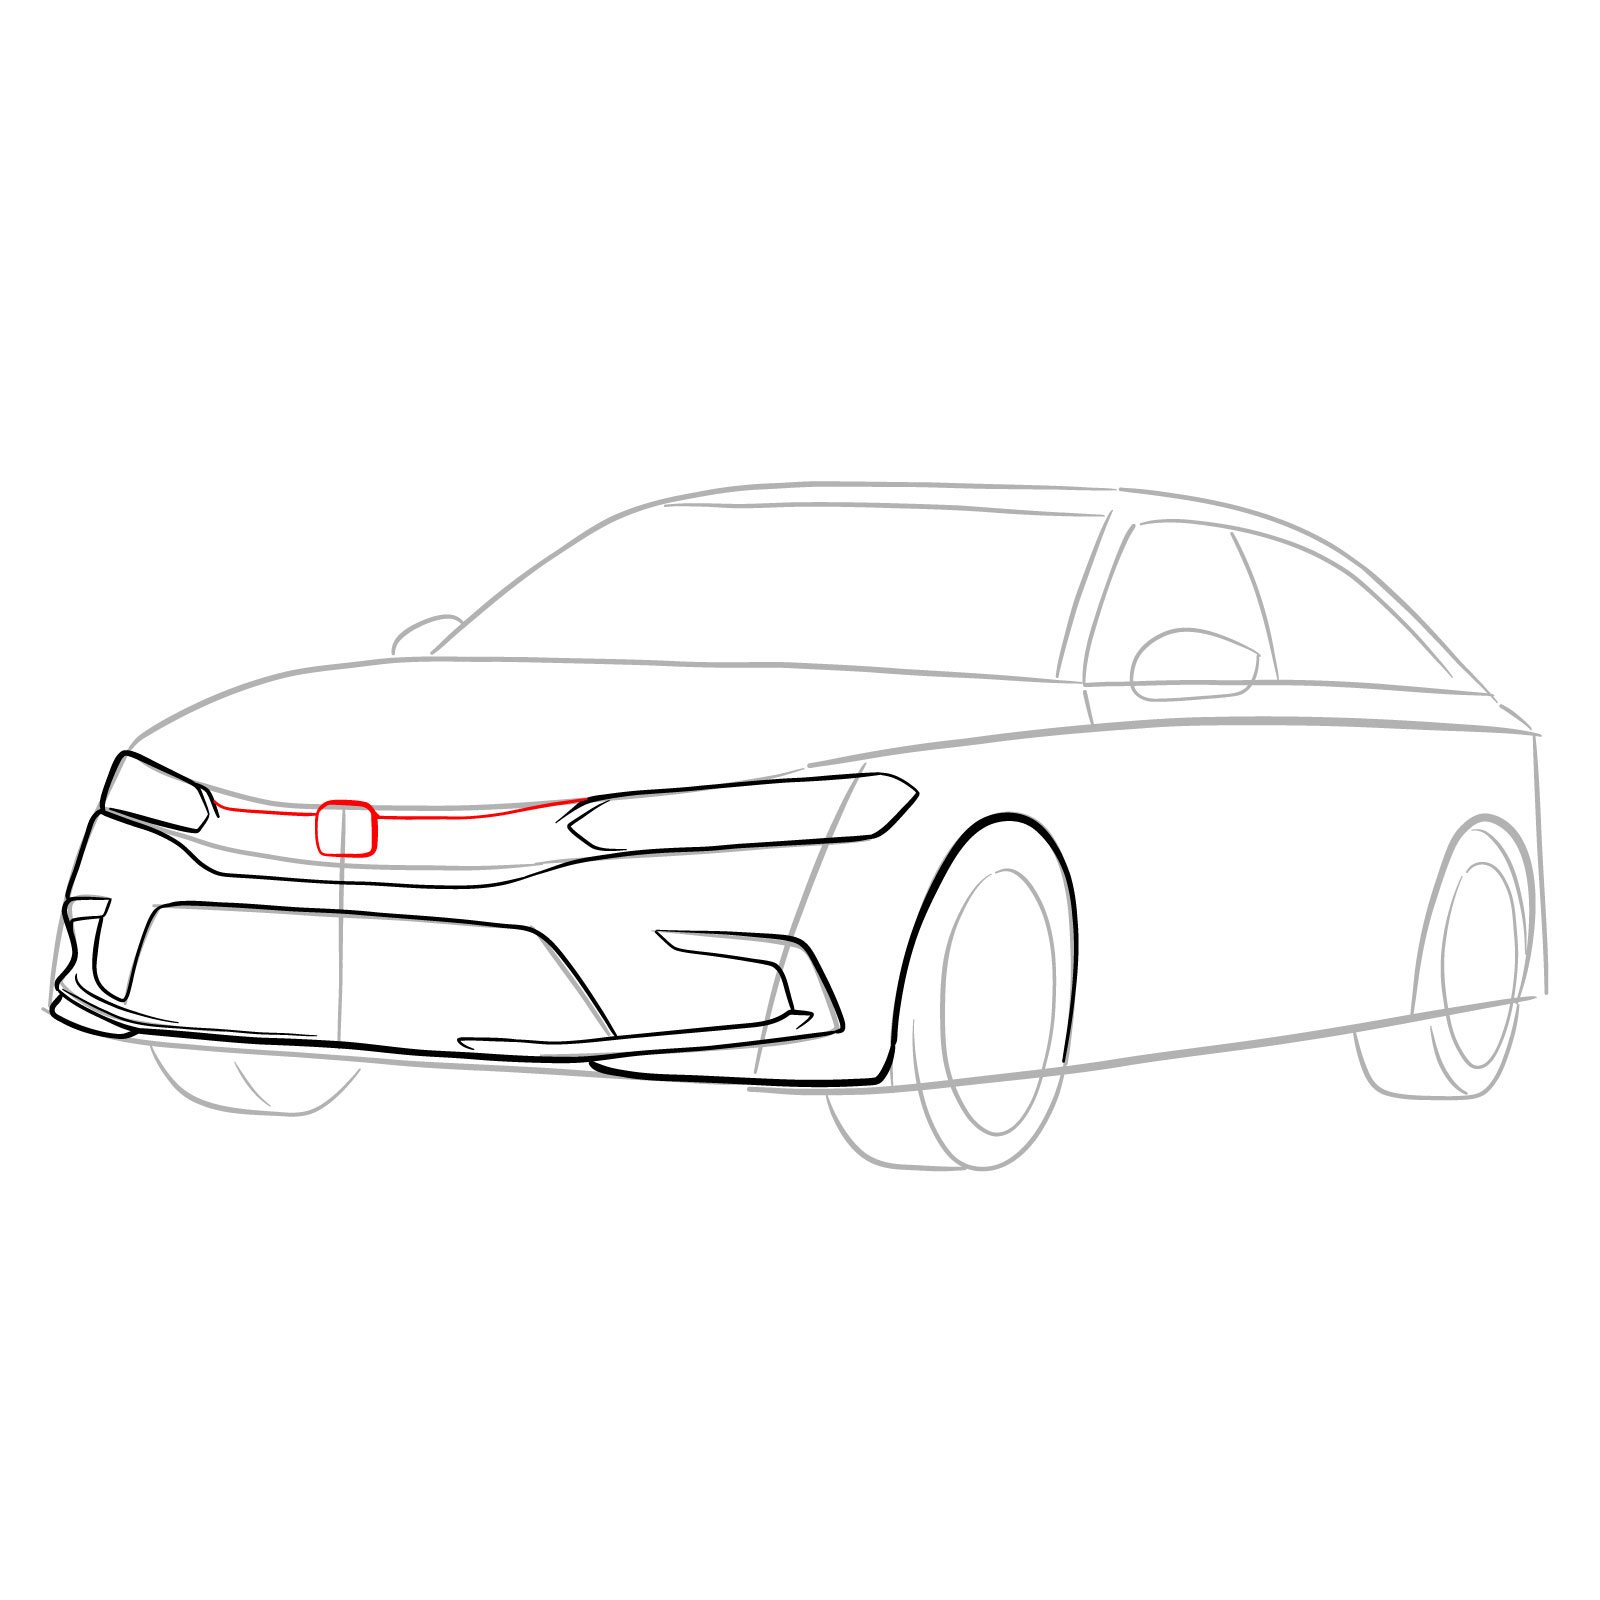 How to draw a 2022 Honda Civic - step 11